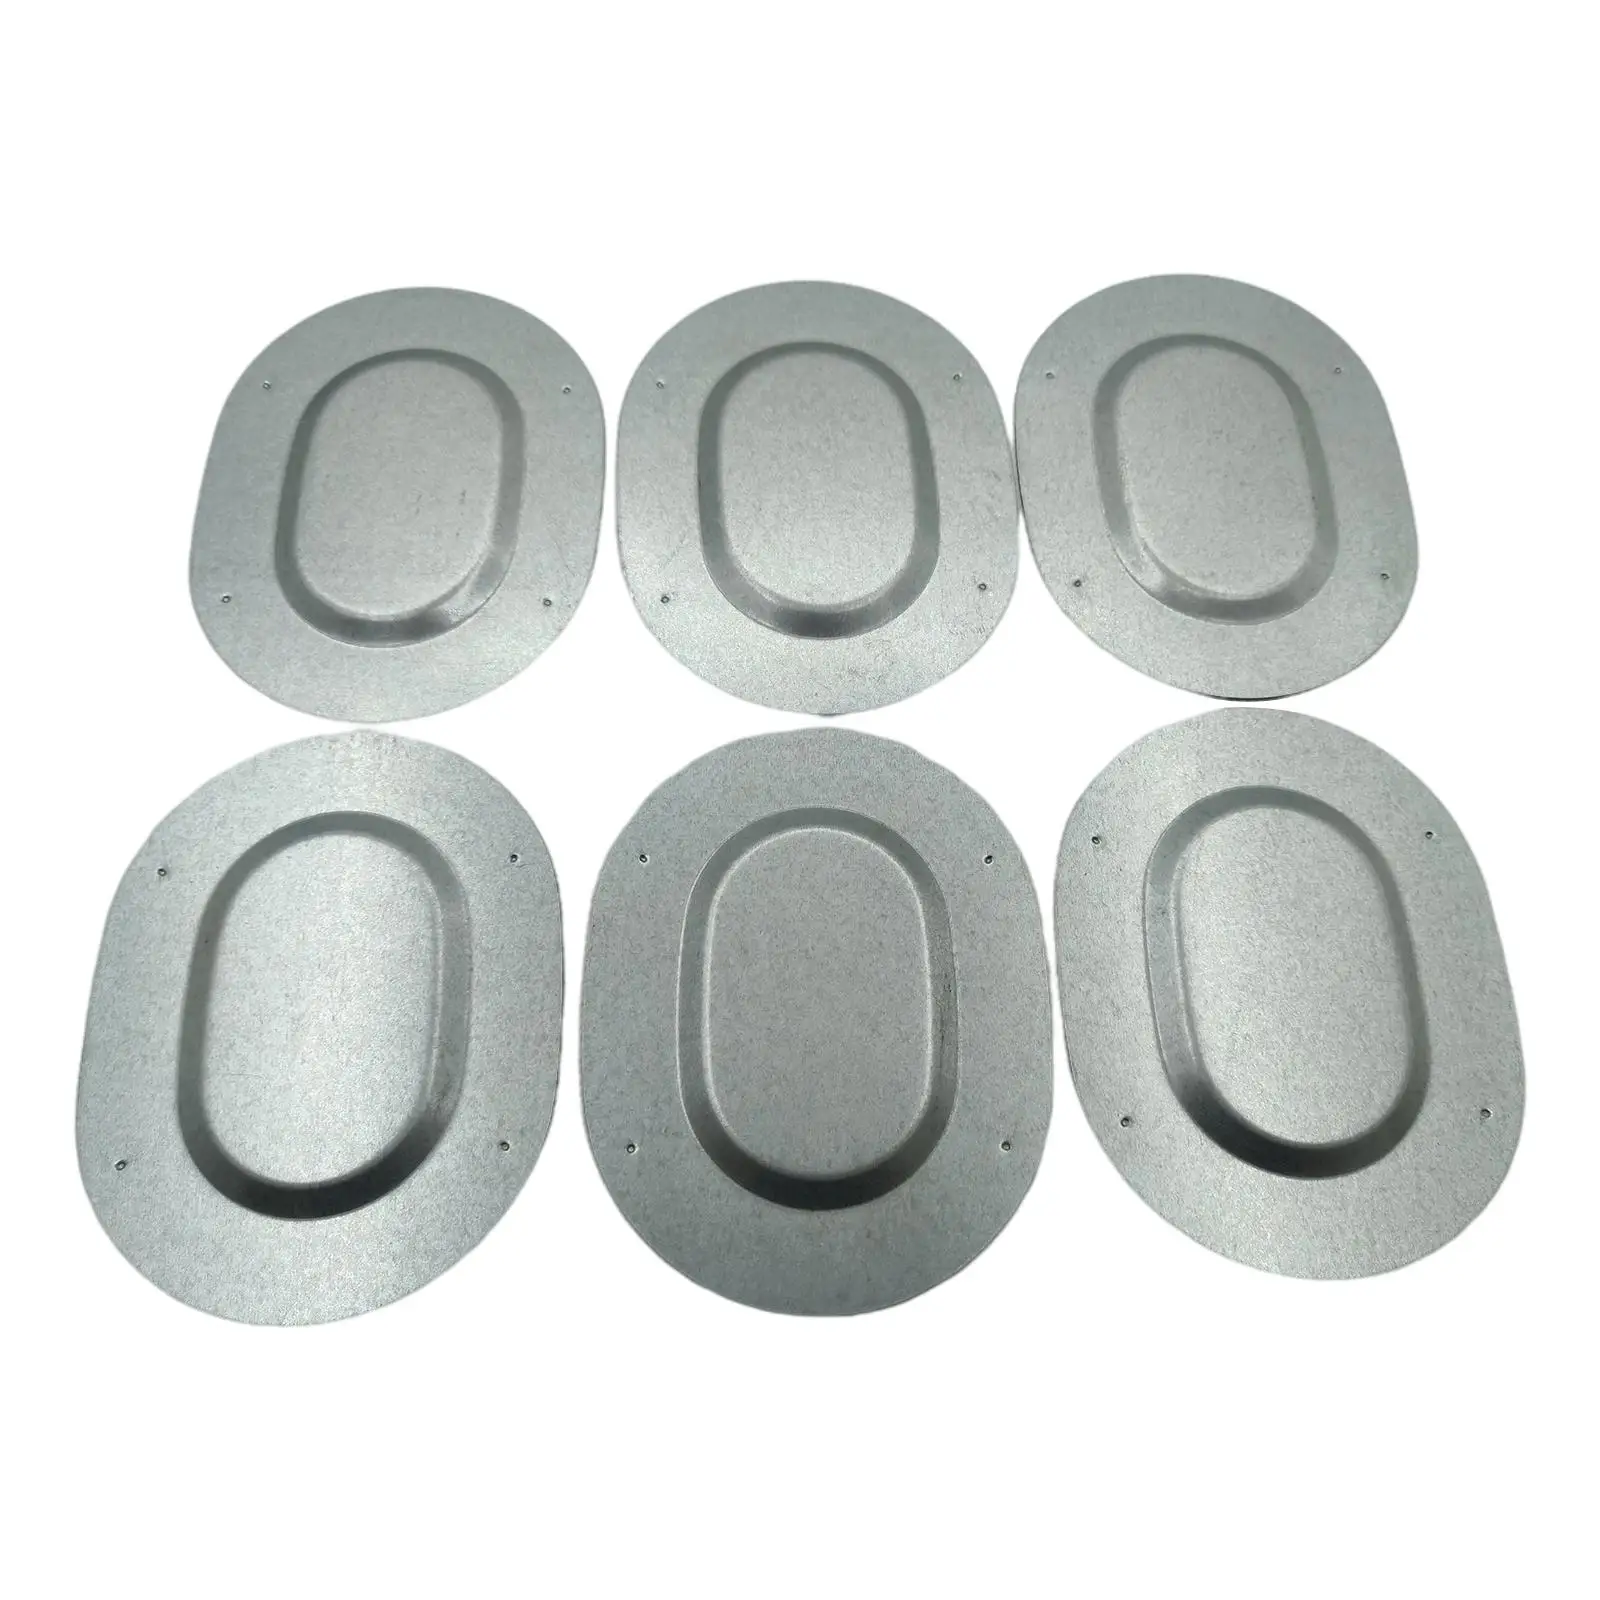 6Pieces Trunk Floor Pan Drain Plugs Set Oil Drain Plugs Fits for  A-Body